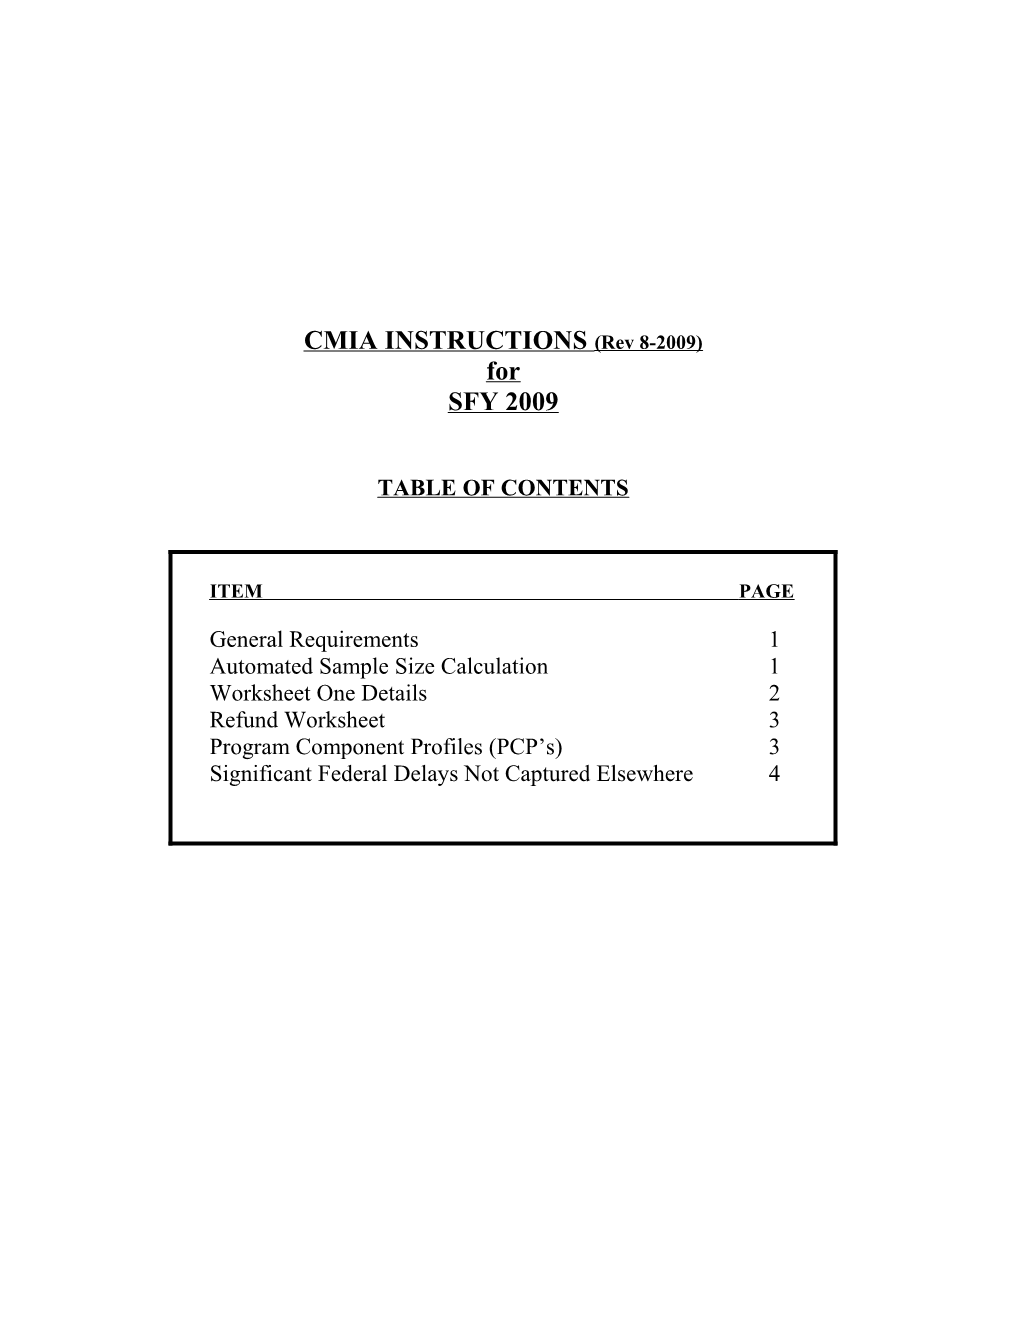 CMIA Interest Calculation and Reporting Instructions